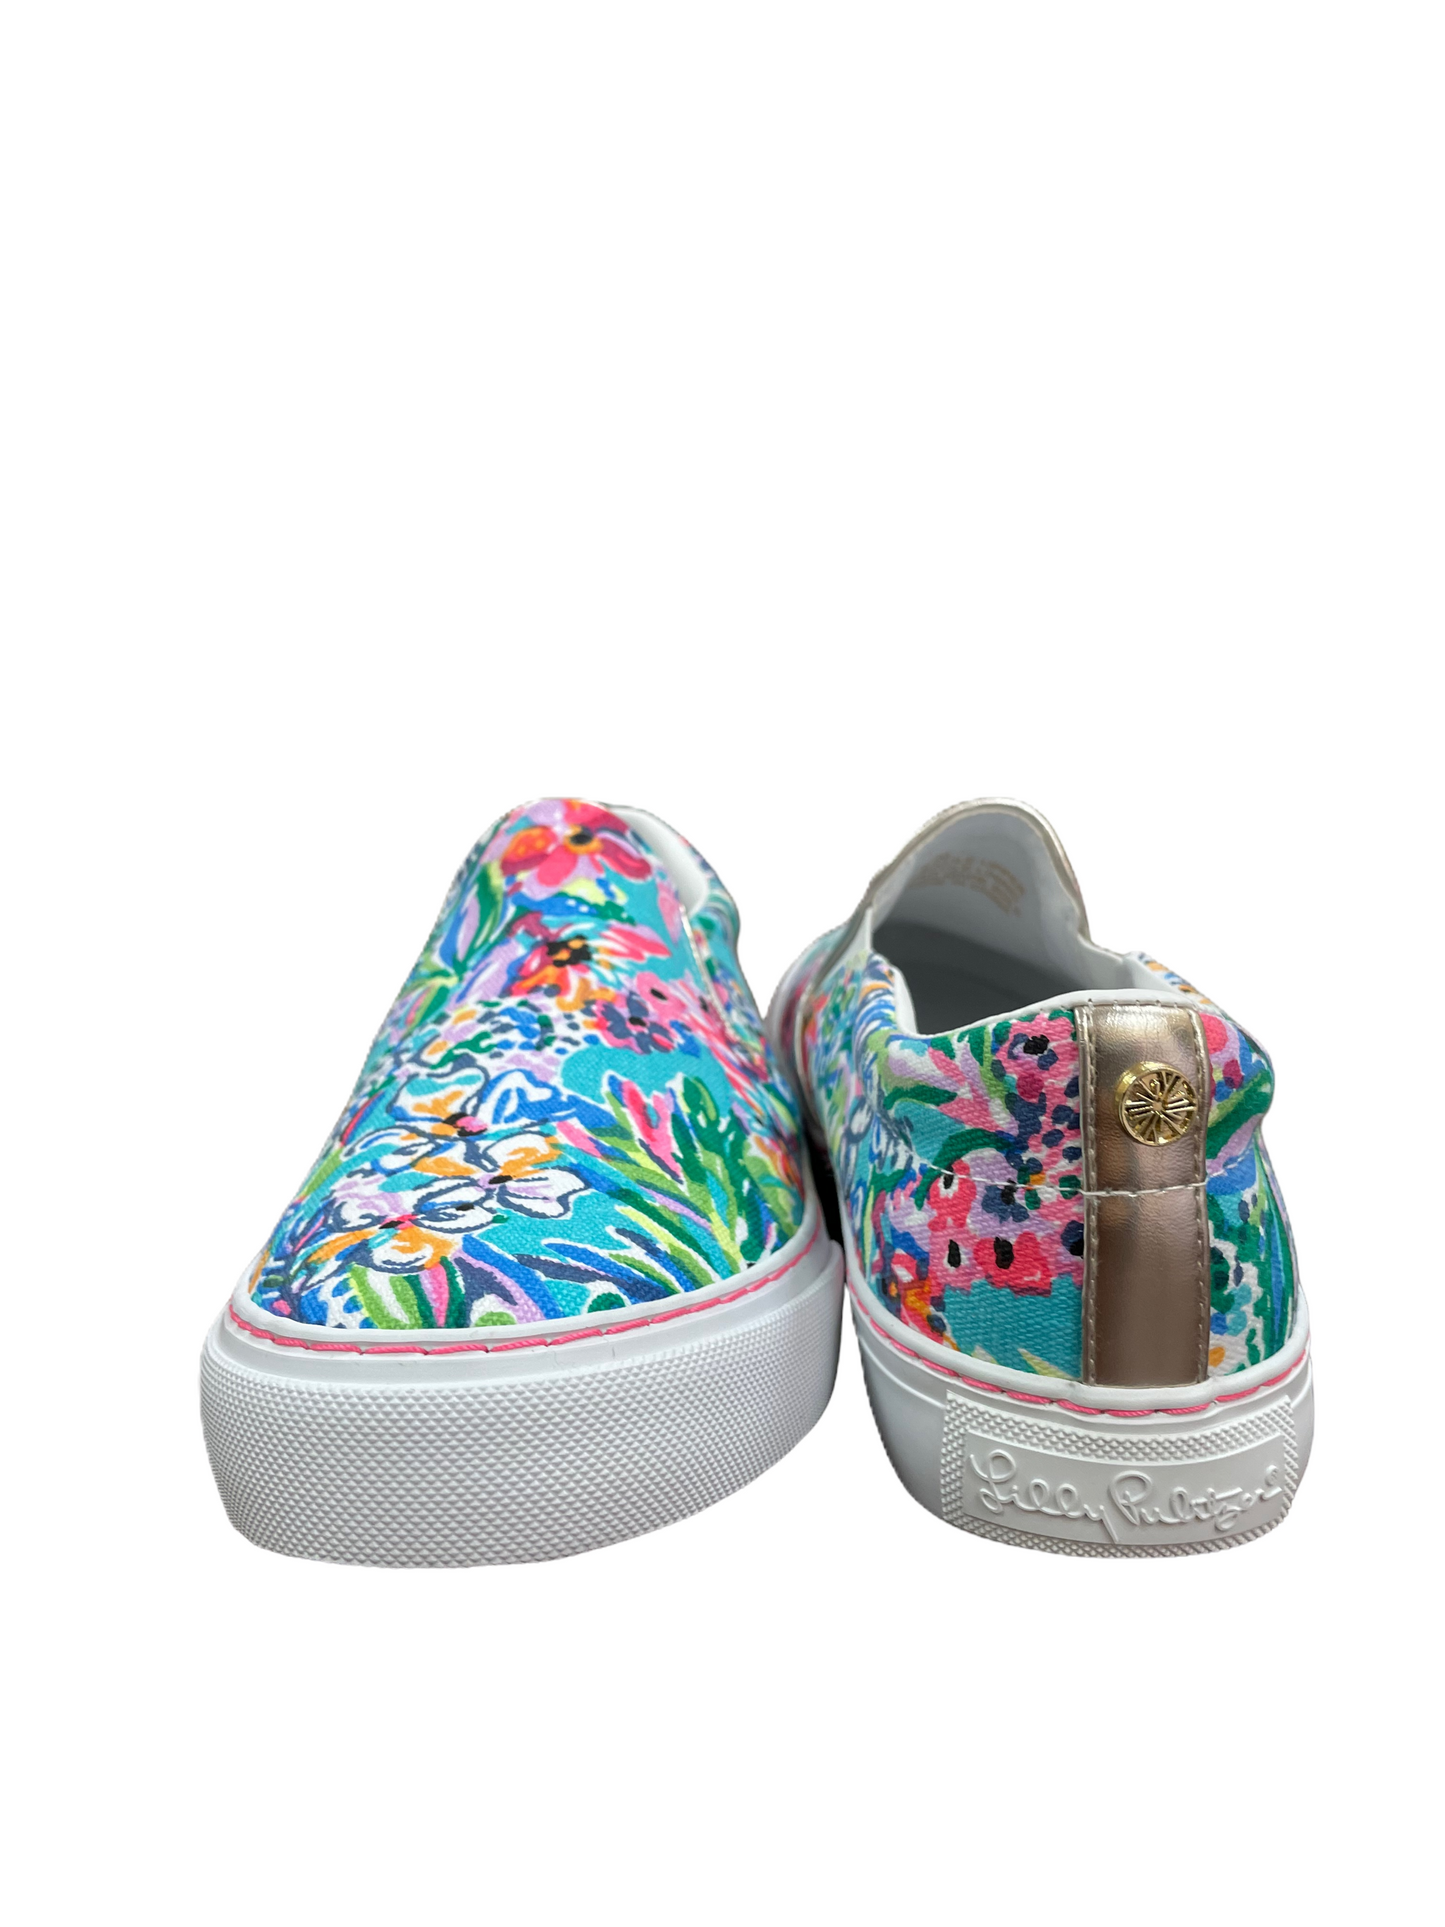 Shoes Sneakers By Lilly Pulitzer  Size: 7.5